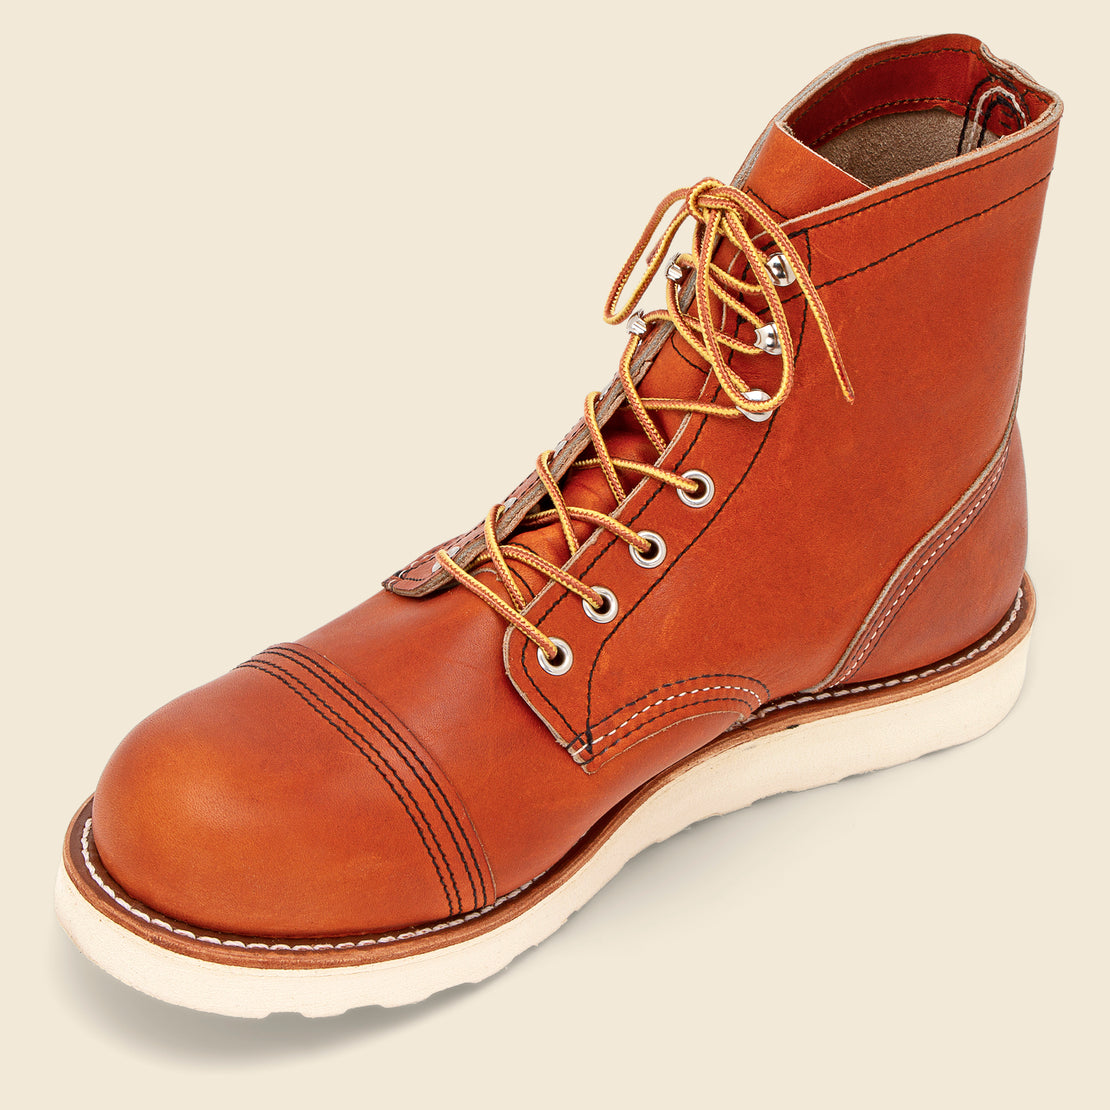 Iron Ranger Traction Tred No. 8089 - Oro Legacy - Red Wing - STAG Provisions - Shoes - Boots / Chukkas